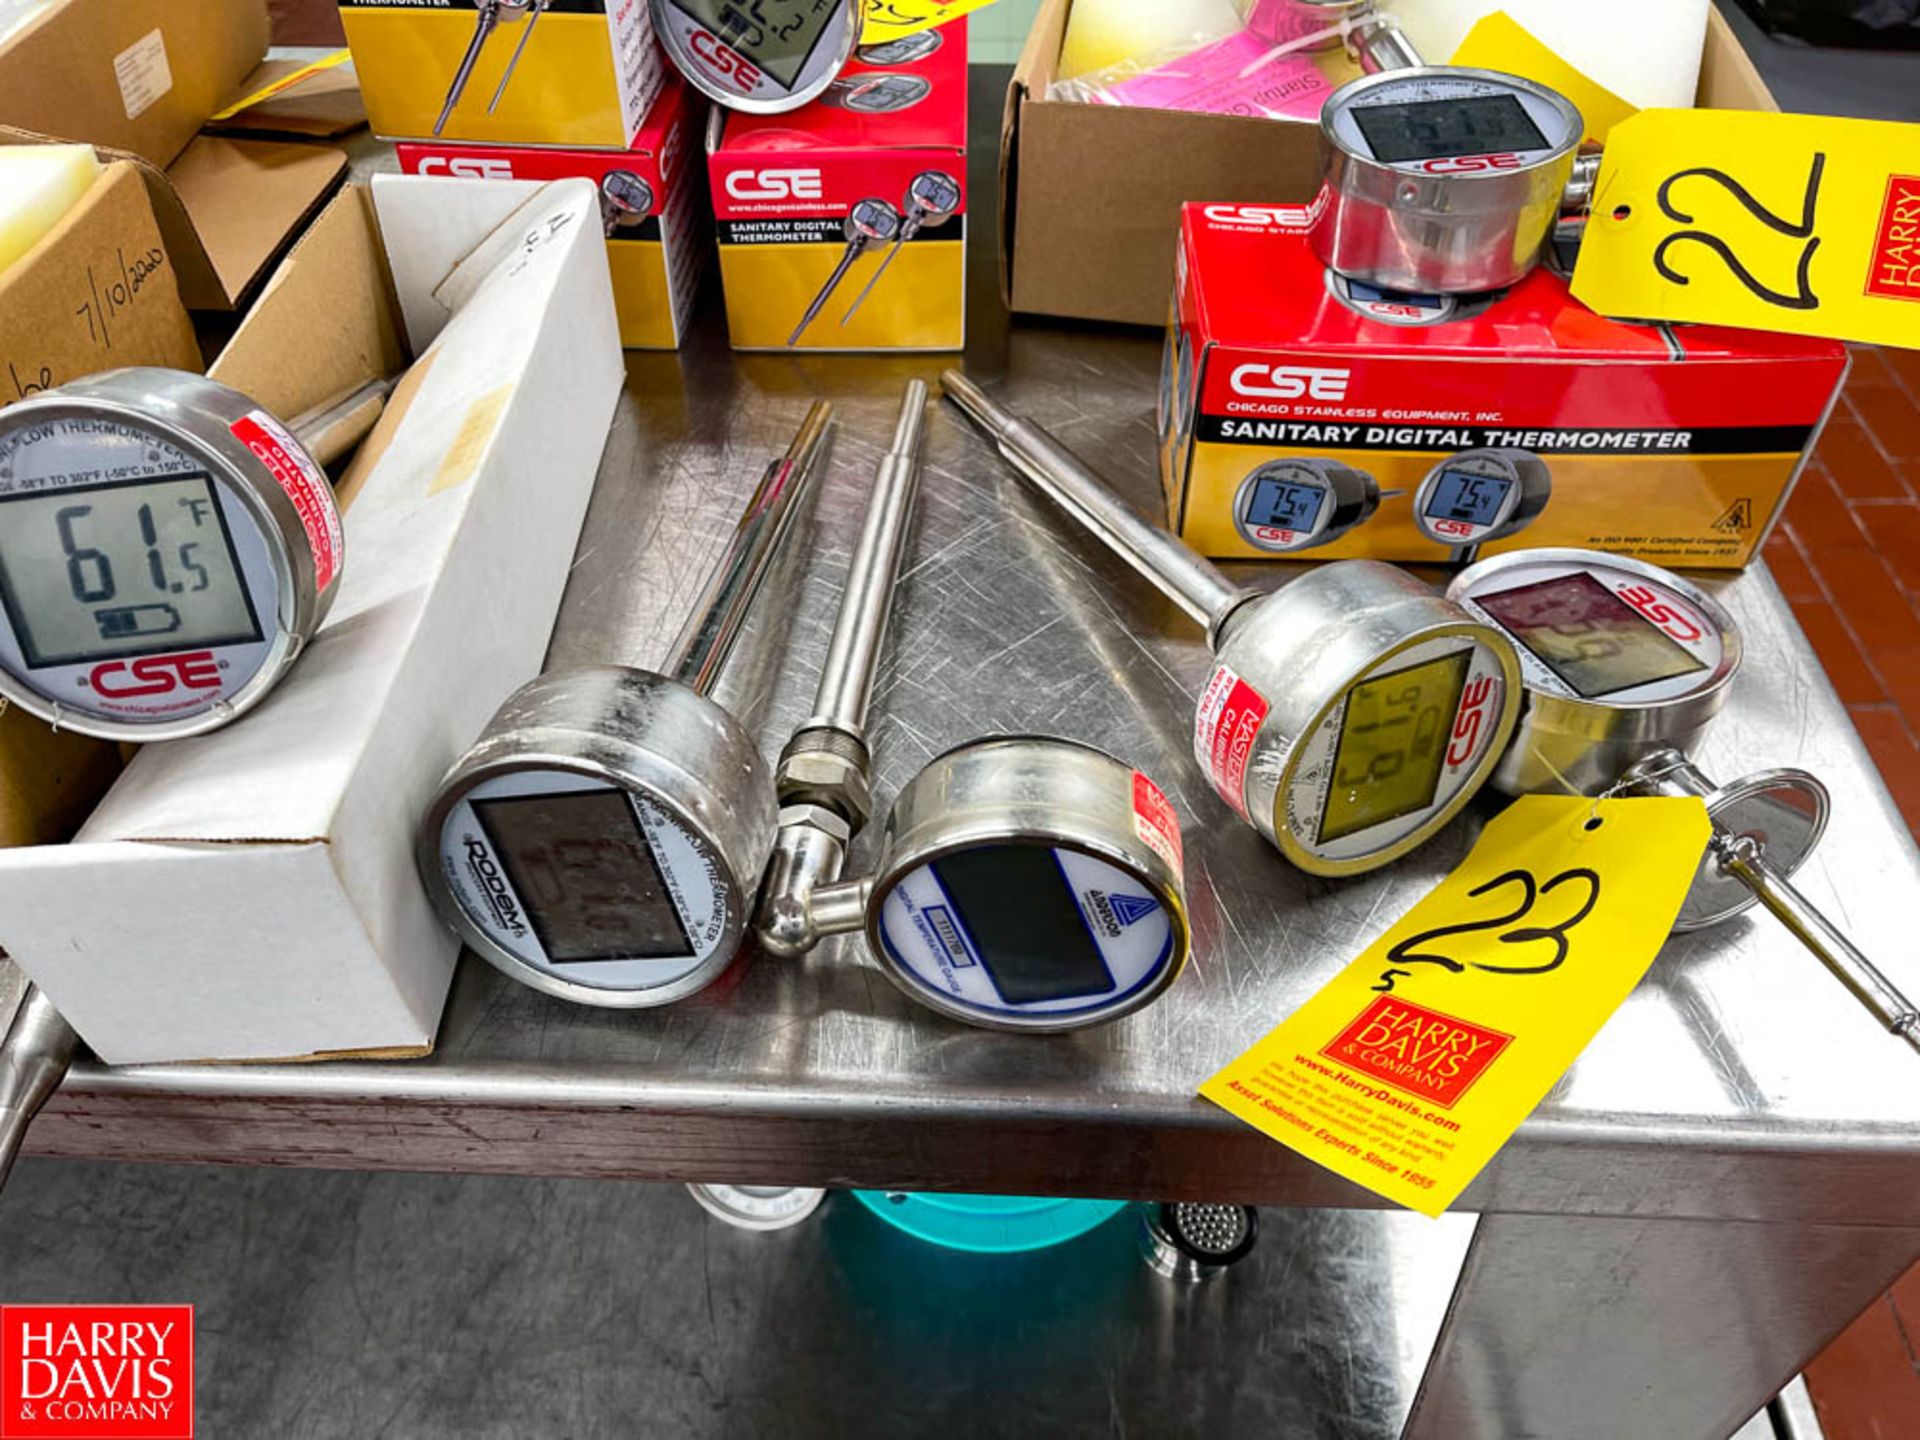 Anderson Chicago Stainless Equipment and Other Digital Thermometers - Rigging Fee: $15